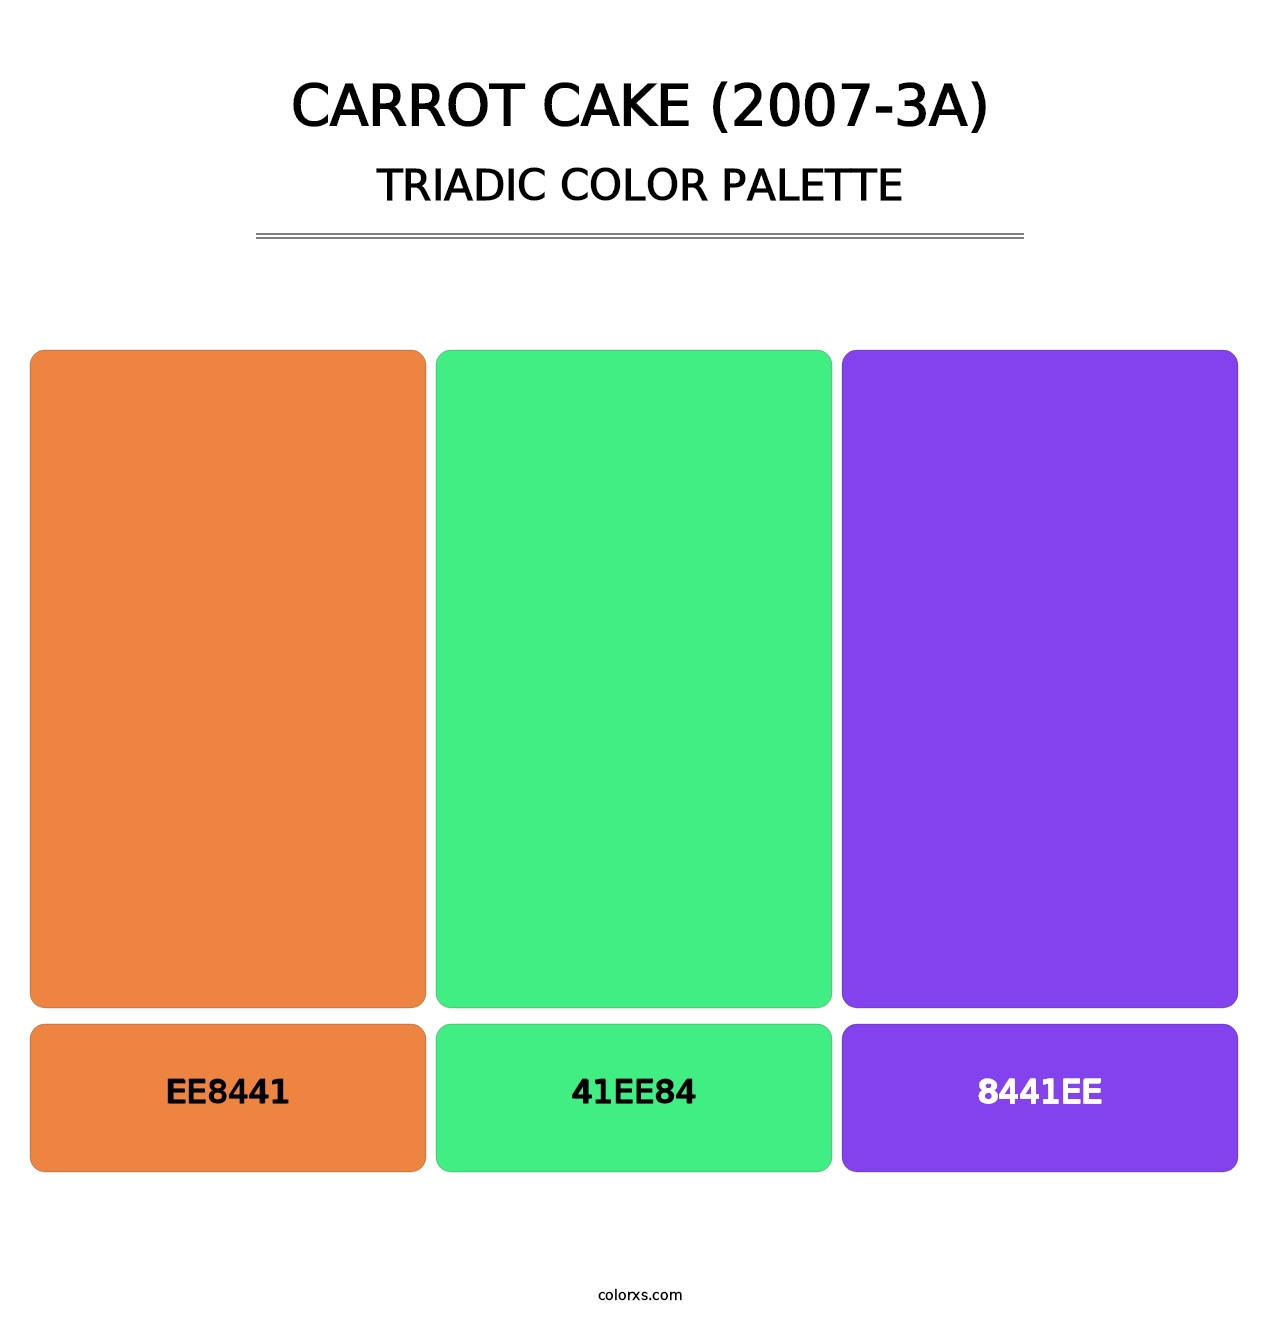 Carrot Cake (2007-3A) - Triadic Color Palette